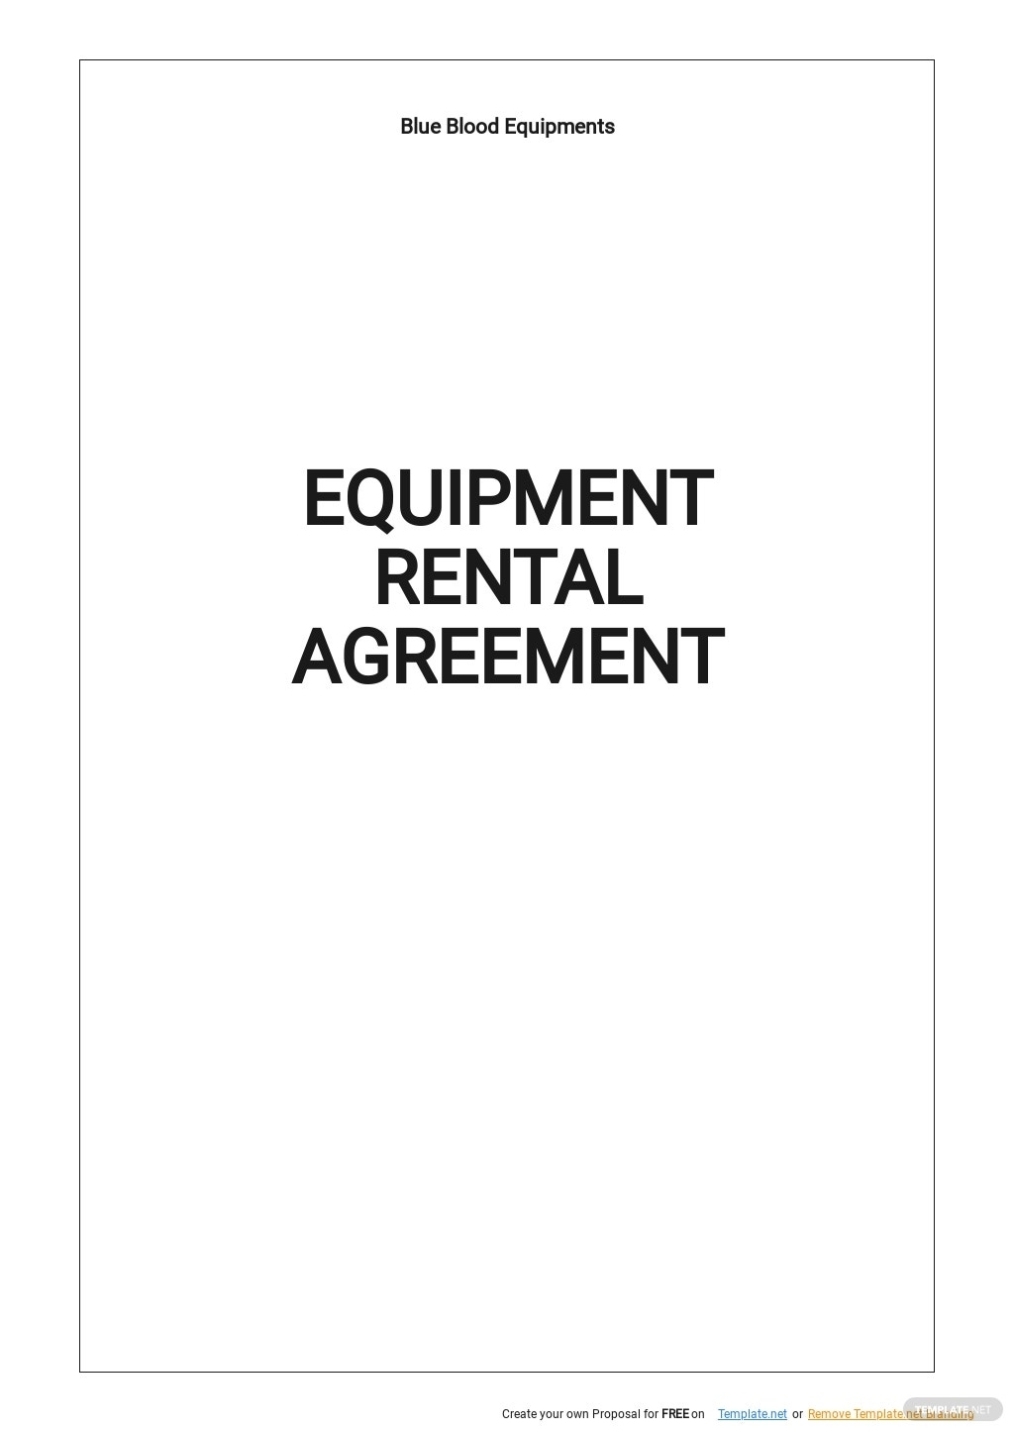 Party Equipment Rental Agreement Template [Free Pdf] | Template Within Party Equipment Rental Agreement Template